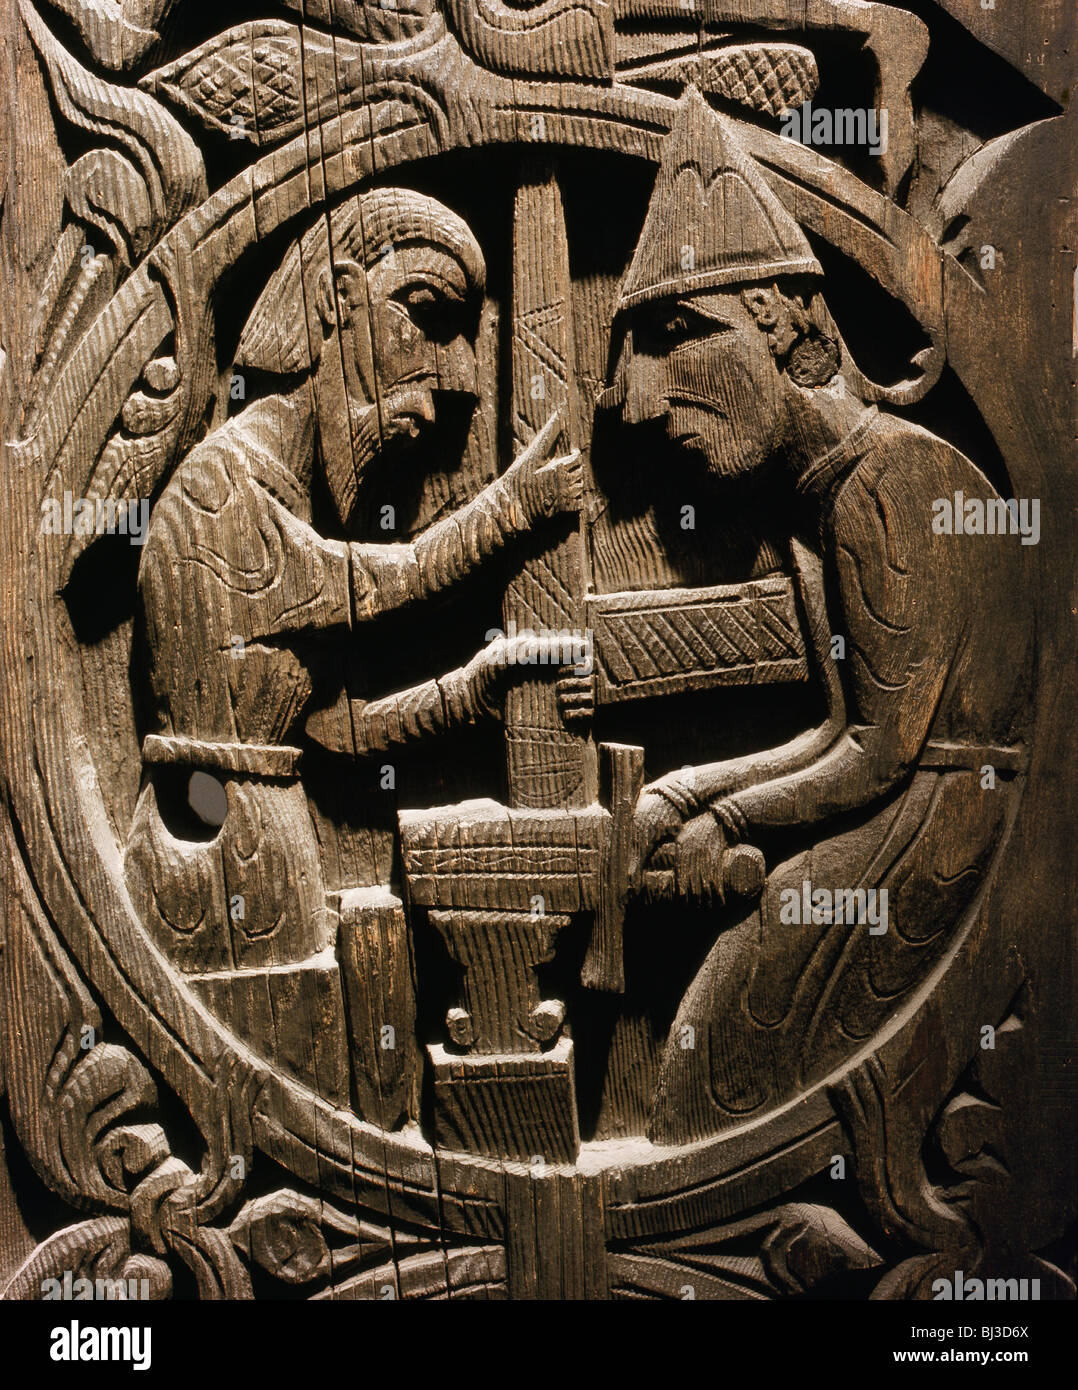 Wooden carving from Hylestad stave church Norway 12th 